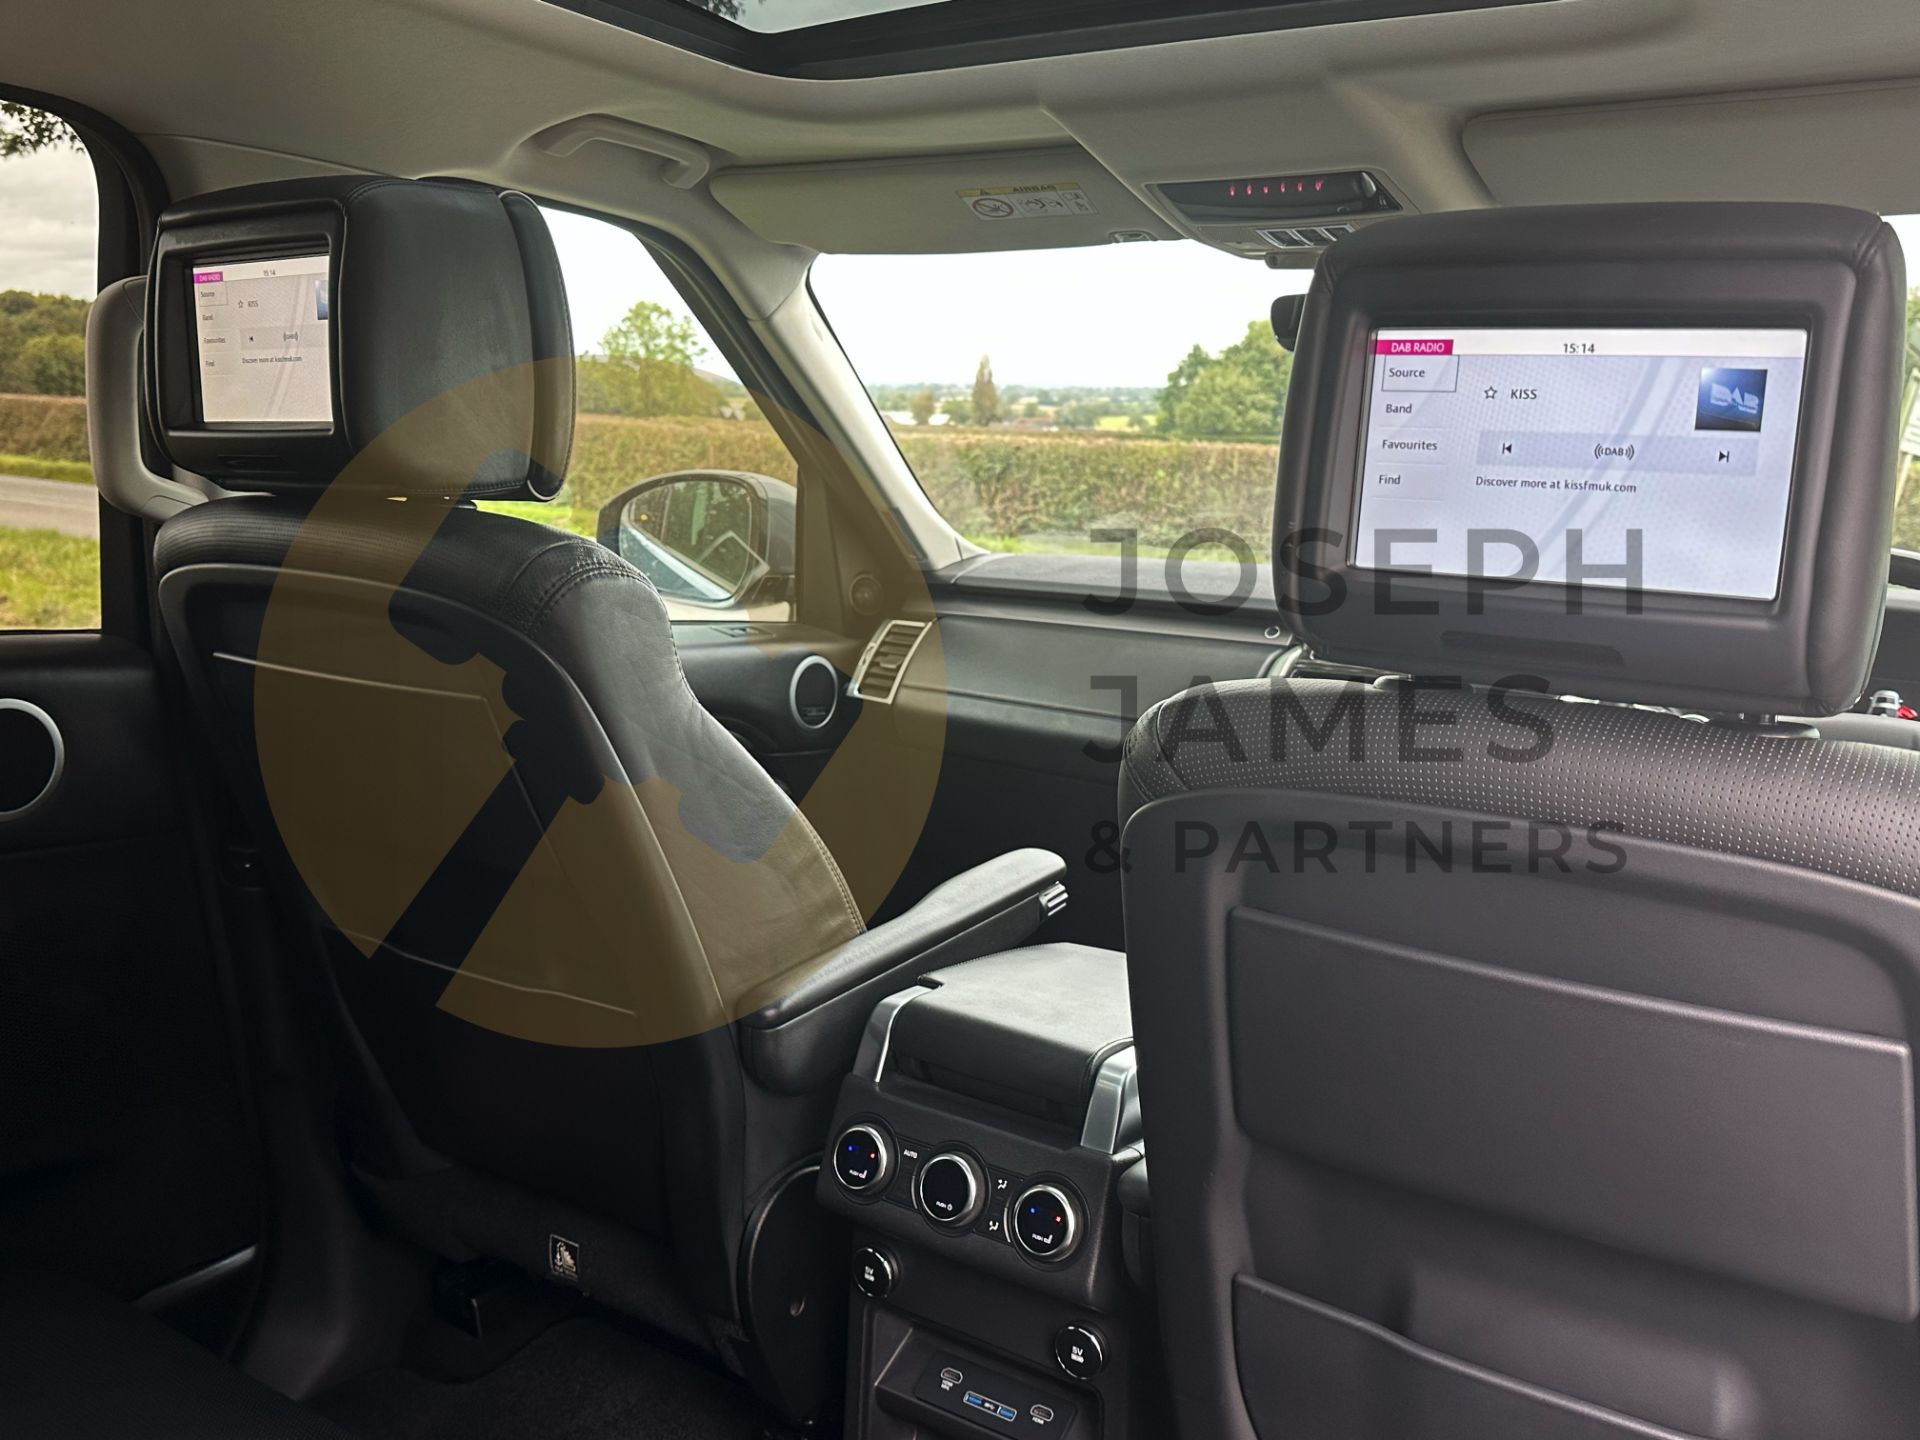 (ON SALE) LAND ROVER DISCOVERY 5 *HSE LUXURY* 7 SEATER SUV (2018 - FACELIFT MODEL) (LOW MILEAGE) - Image 38 of 66